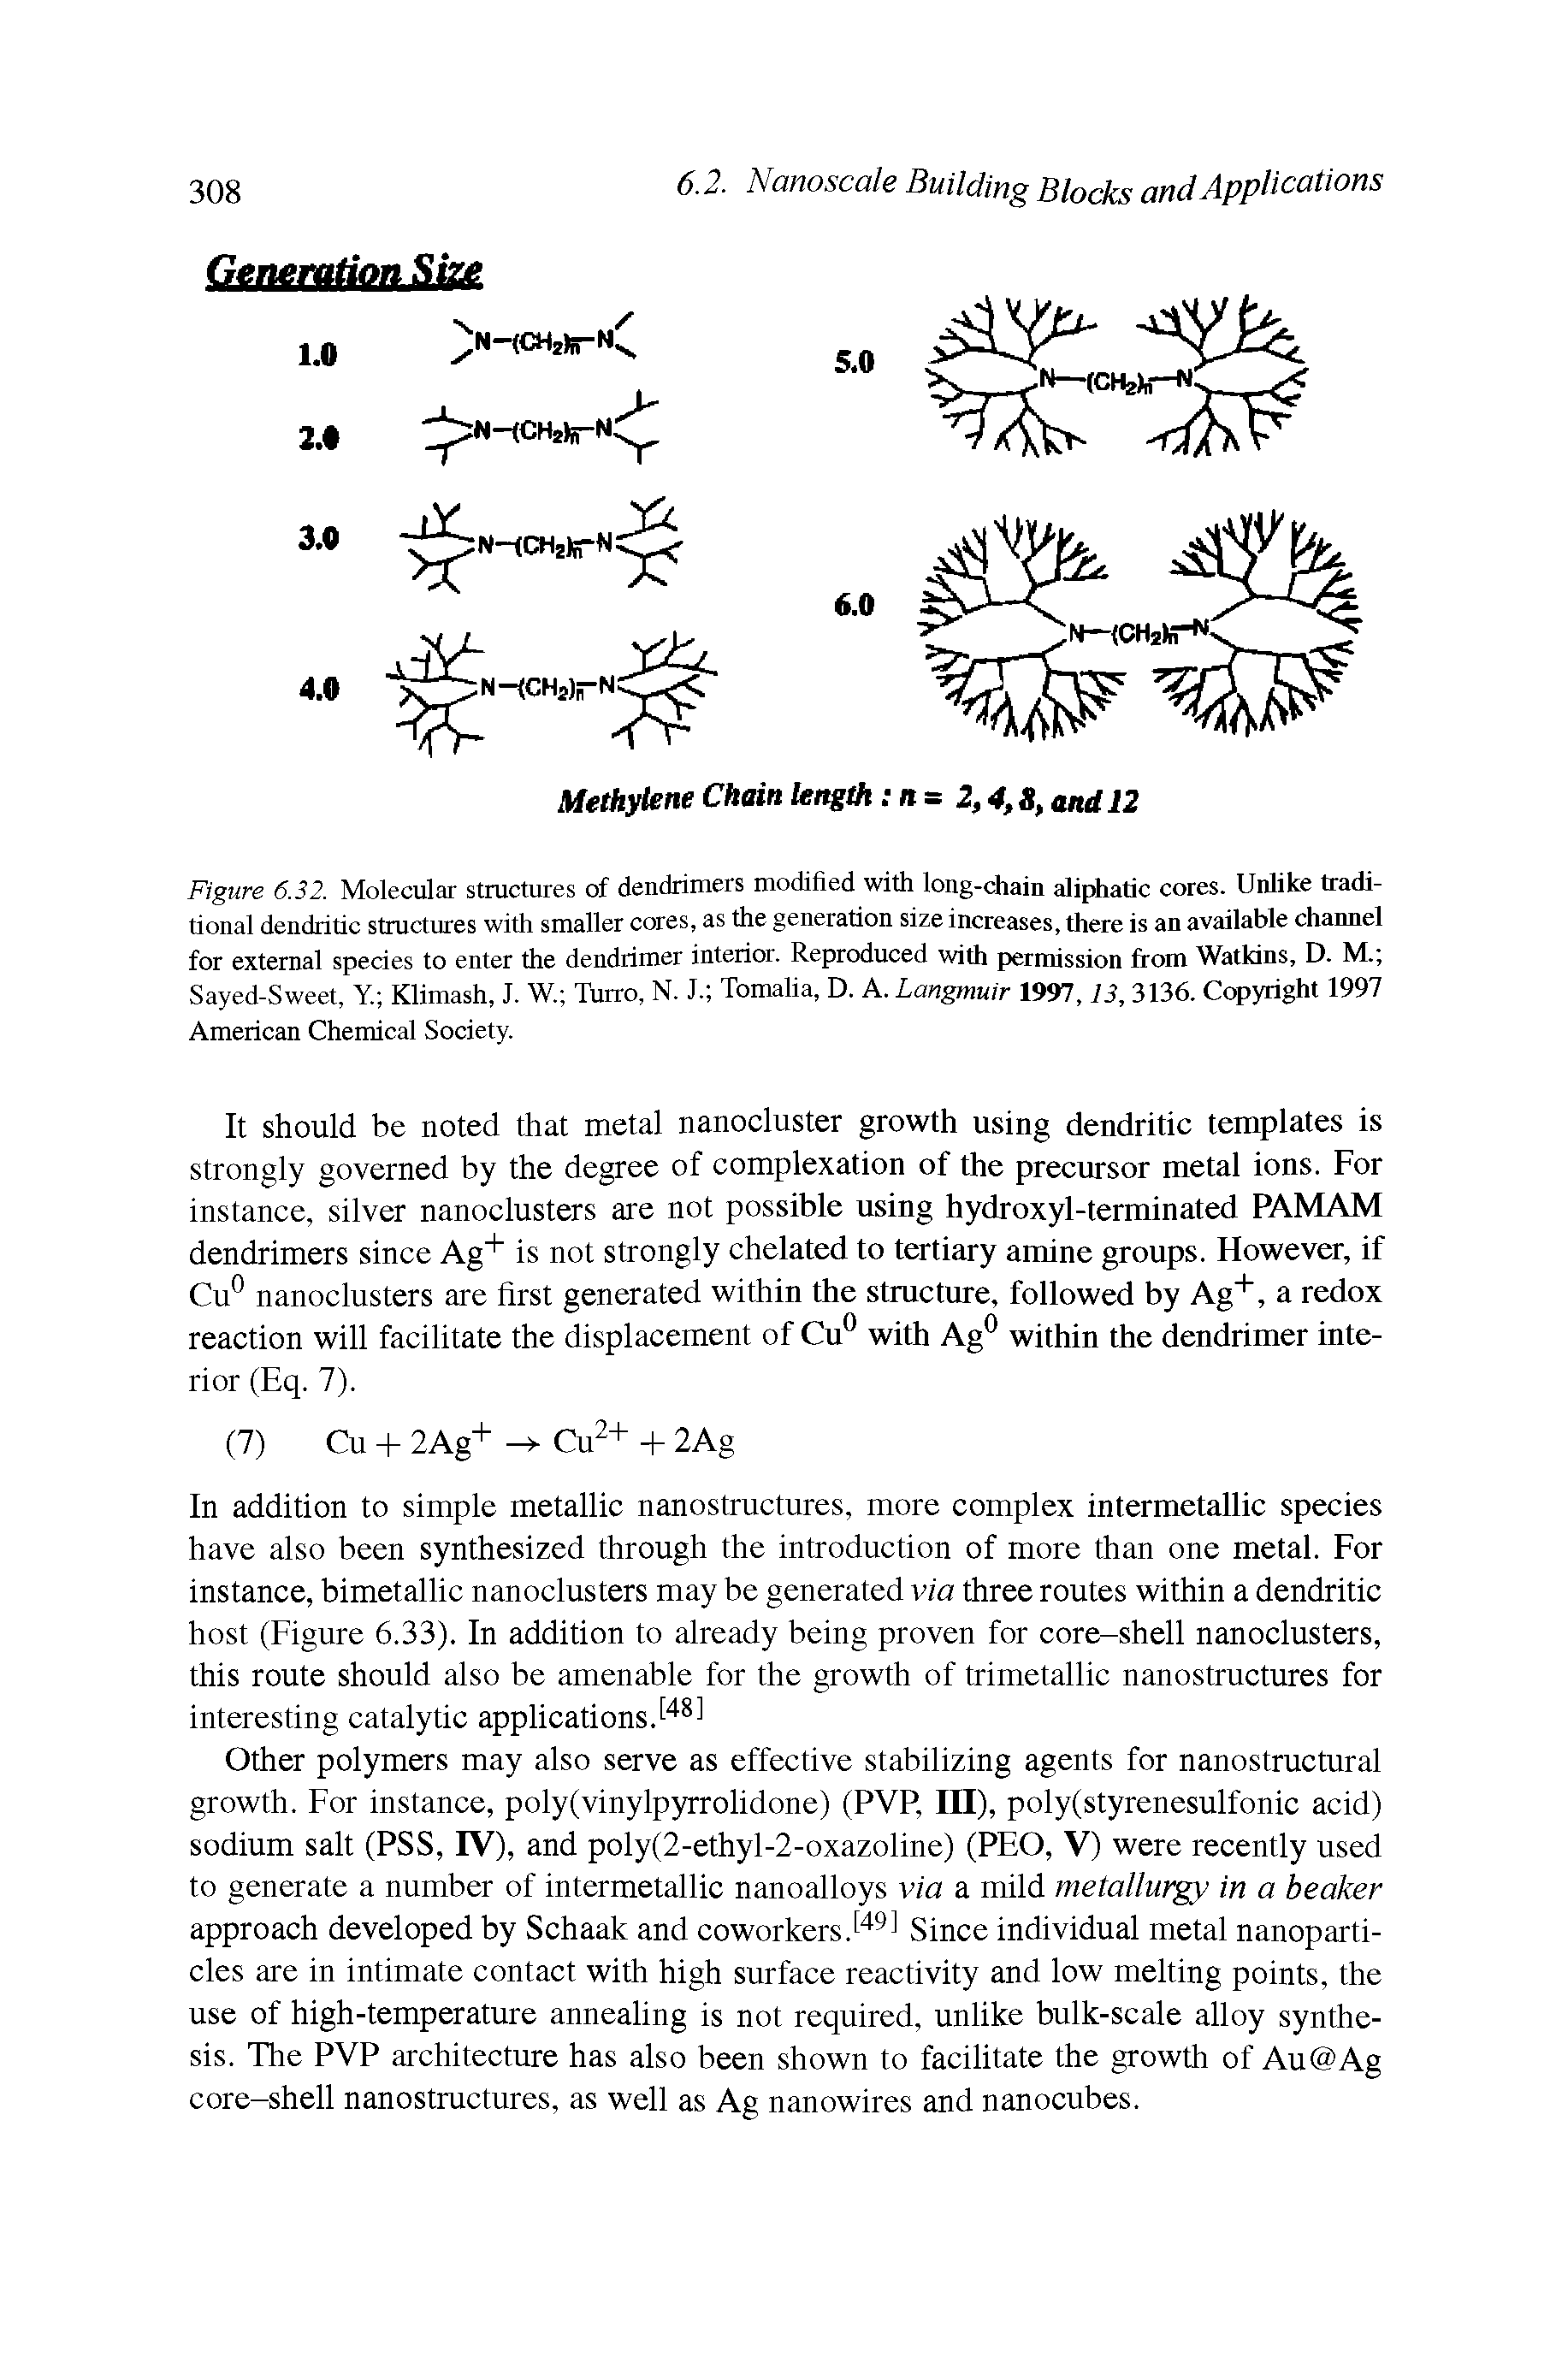 Figure 6.32. Molecular structures of dendrimers modified with long-chain aliphatic cores. Unlike traditional dendritic structures with smaller cores, as the generation size increases, there is an available channel for external species to enter the dendrimer interior. Reproduced with permission from Watkins, D. M. Sayed-Sweet, Y Klimash, J. W Turro, N. J. Tomalia, D. A. Langmuir 1997,13, 3136. Copyright 1997 American Chemical Society.